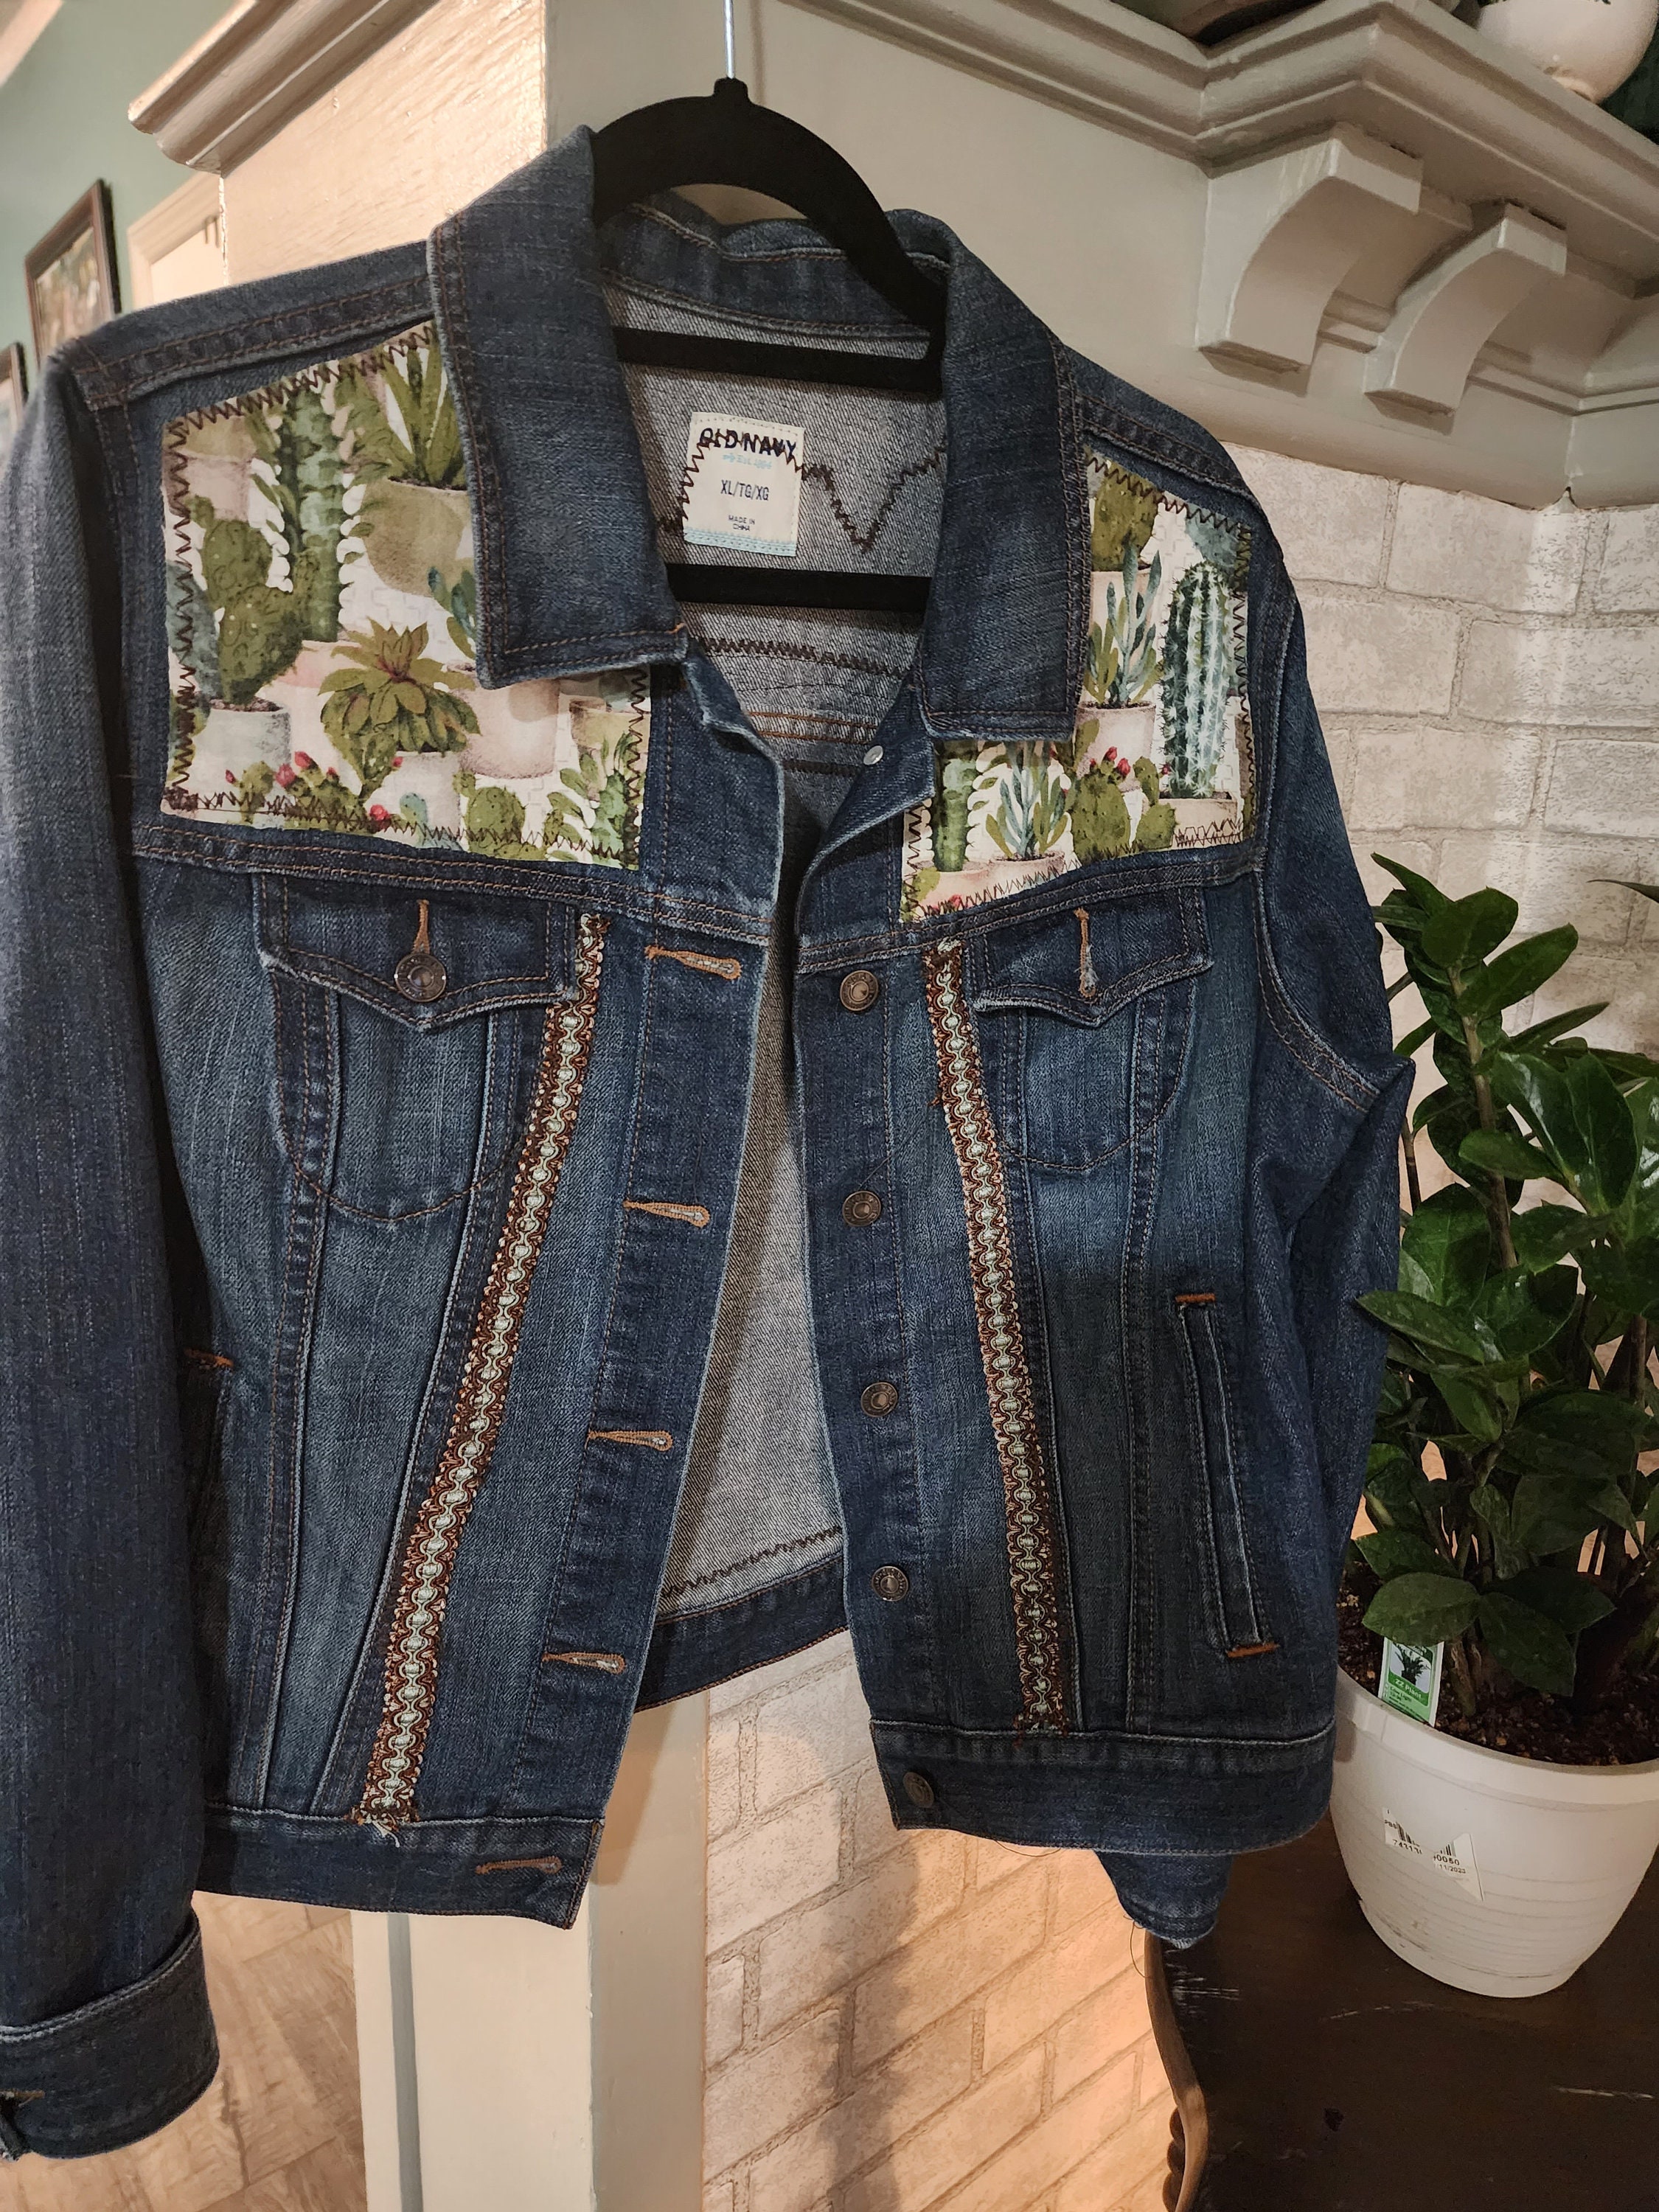 Personalized Denim Jacket With Patches, Customized Jean Patch